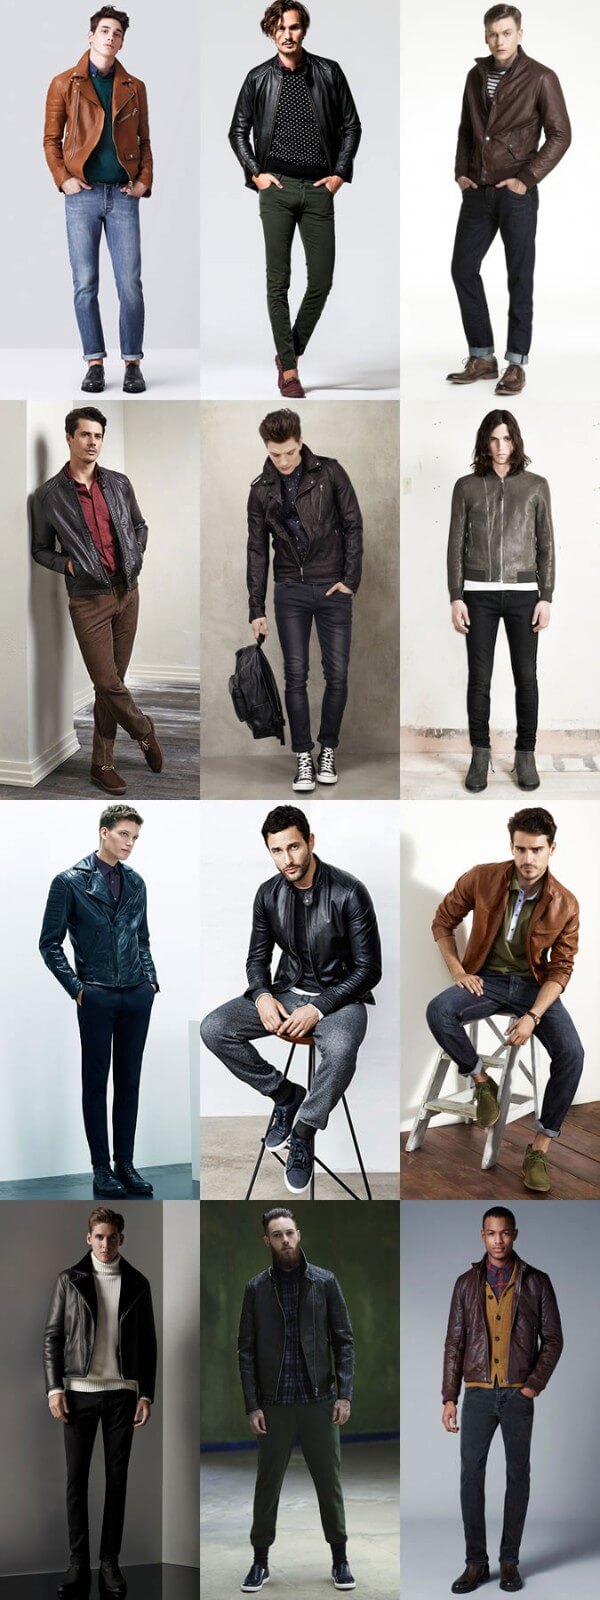 Men traditional leather jackets look book inspiration and tips for combination for winter season